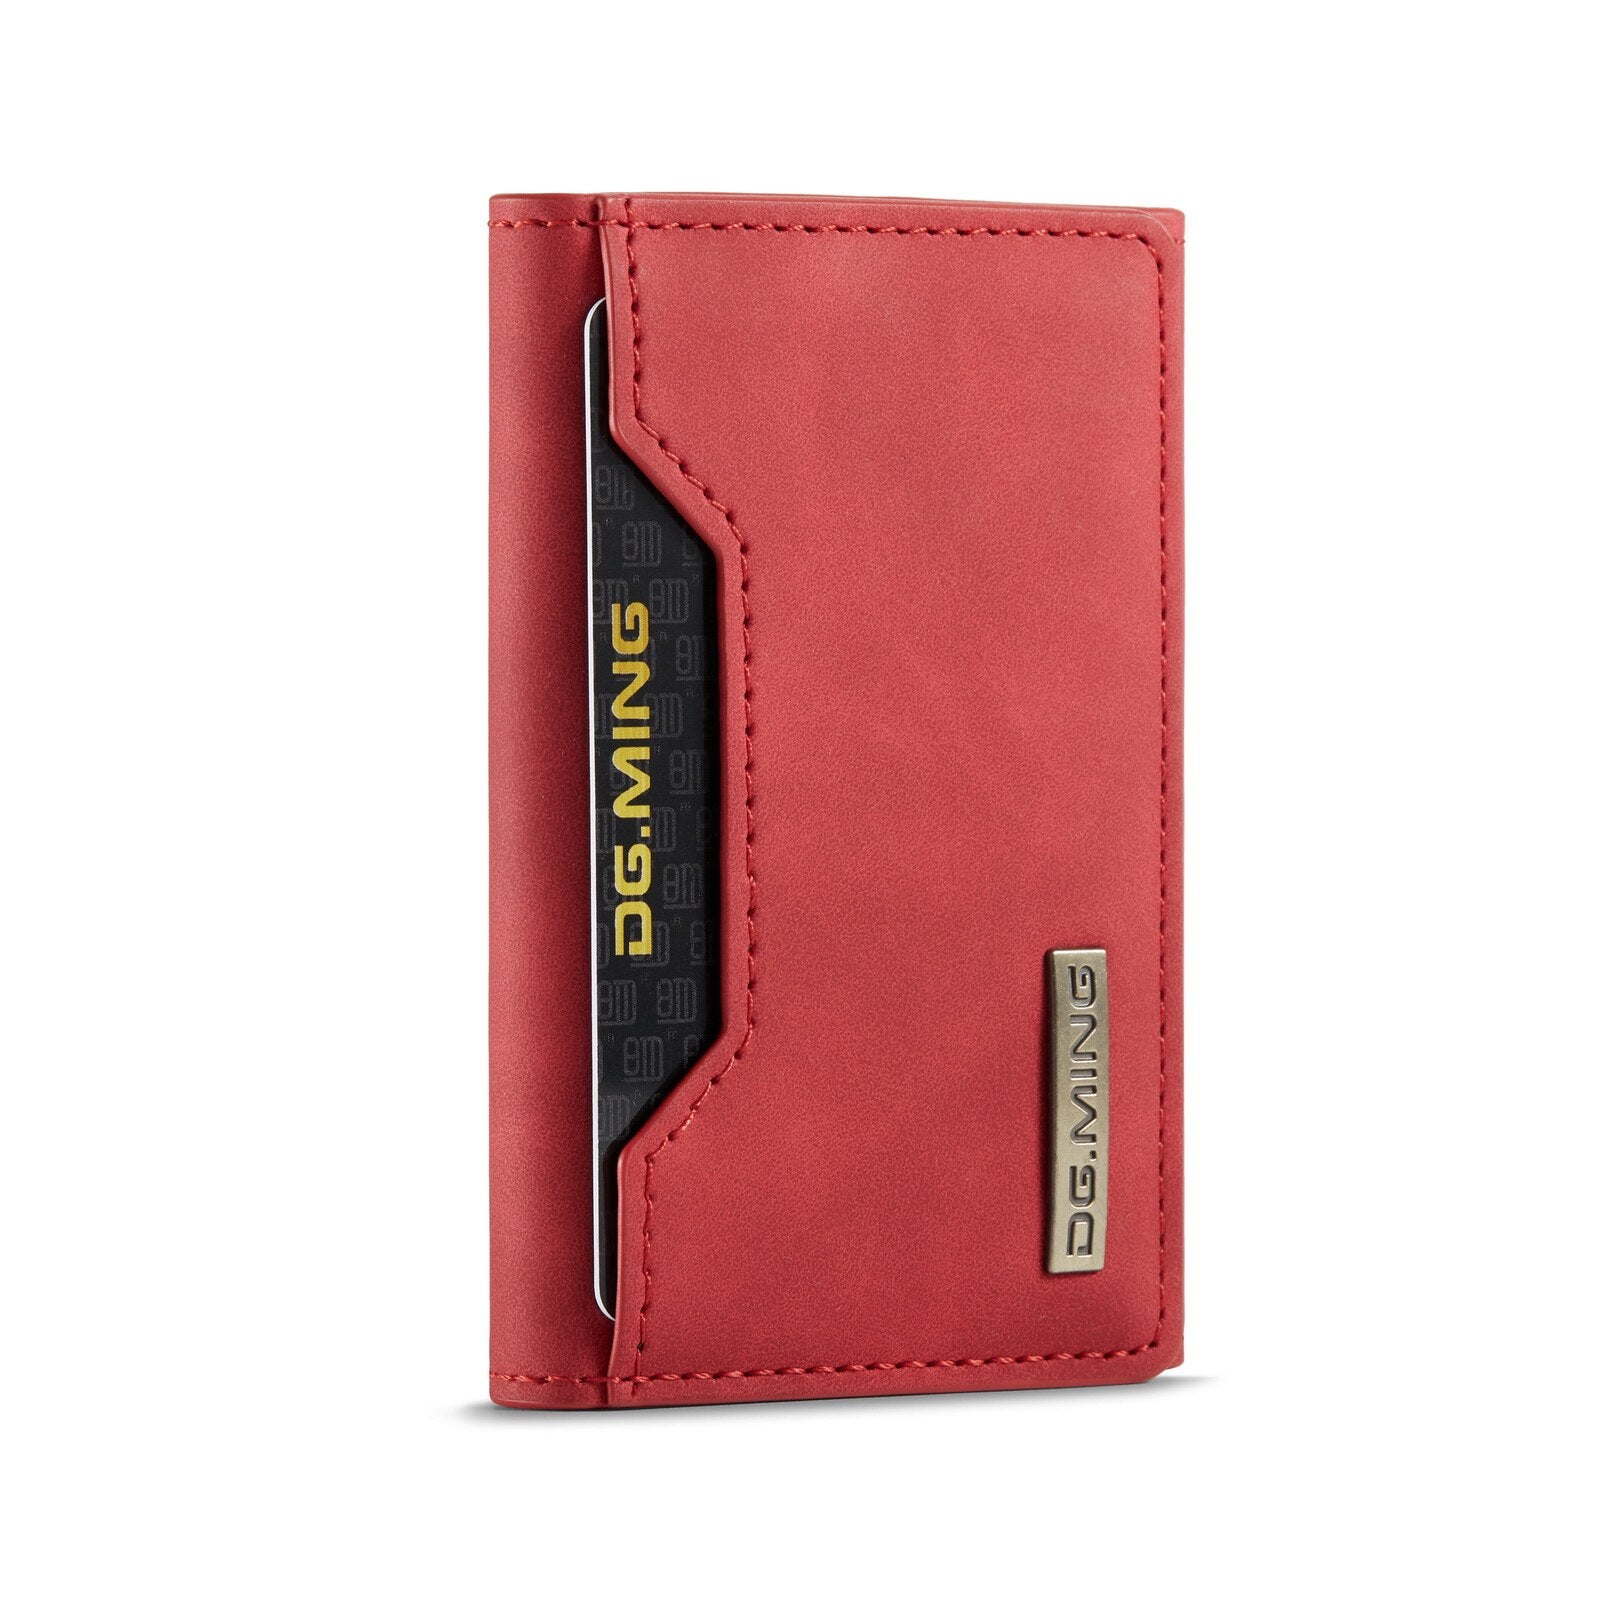 Leather Phone Wallet And Magnetic Card Holder - Fits Any Smartphone - Red - sky-cover